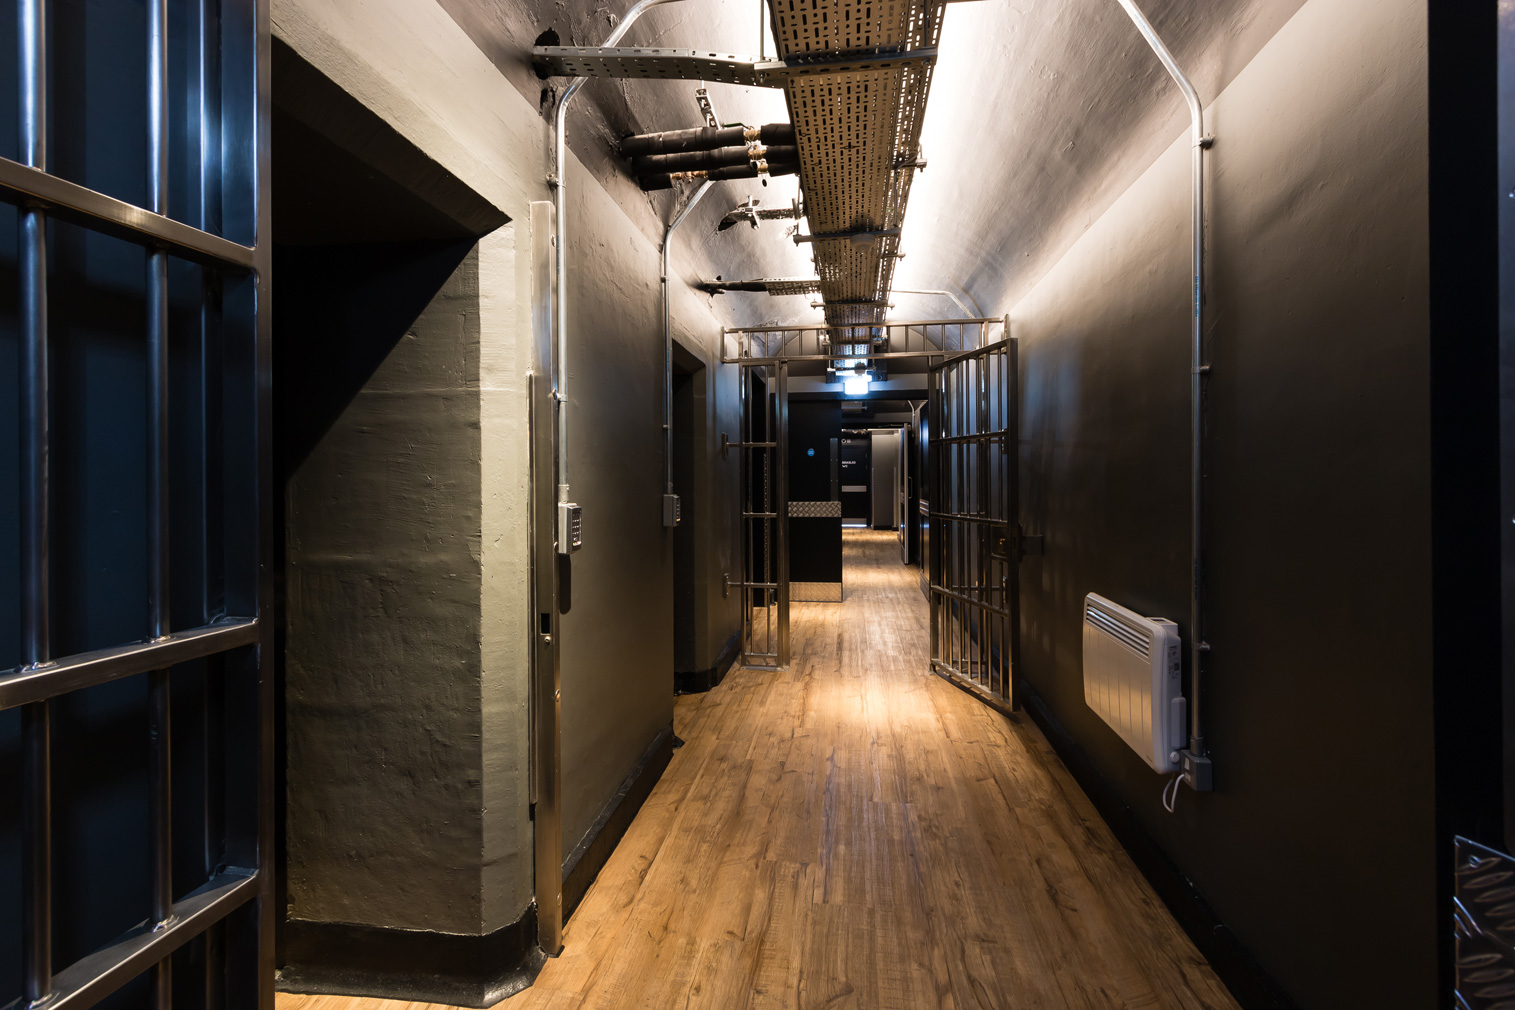 The Court is the latest addition to the Code Pod Hostels portfolio